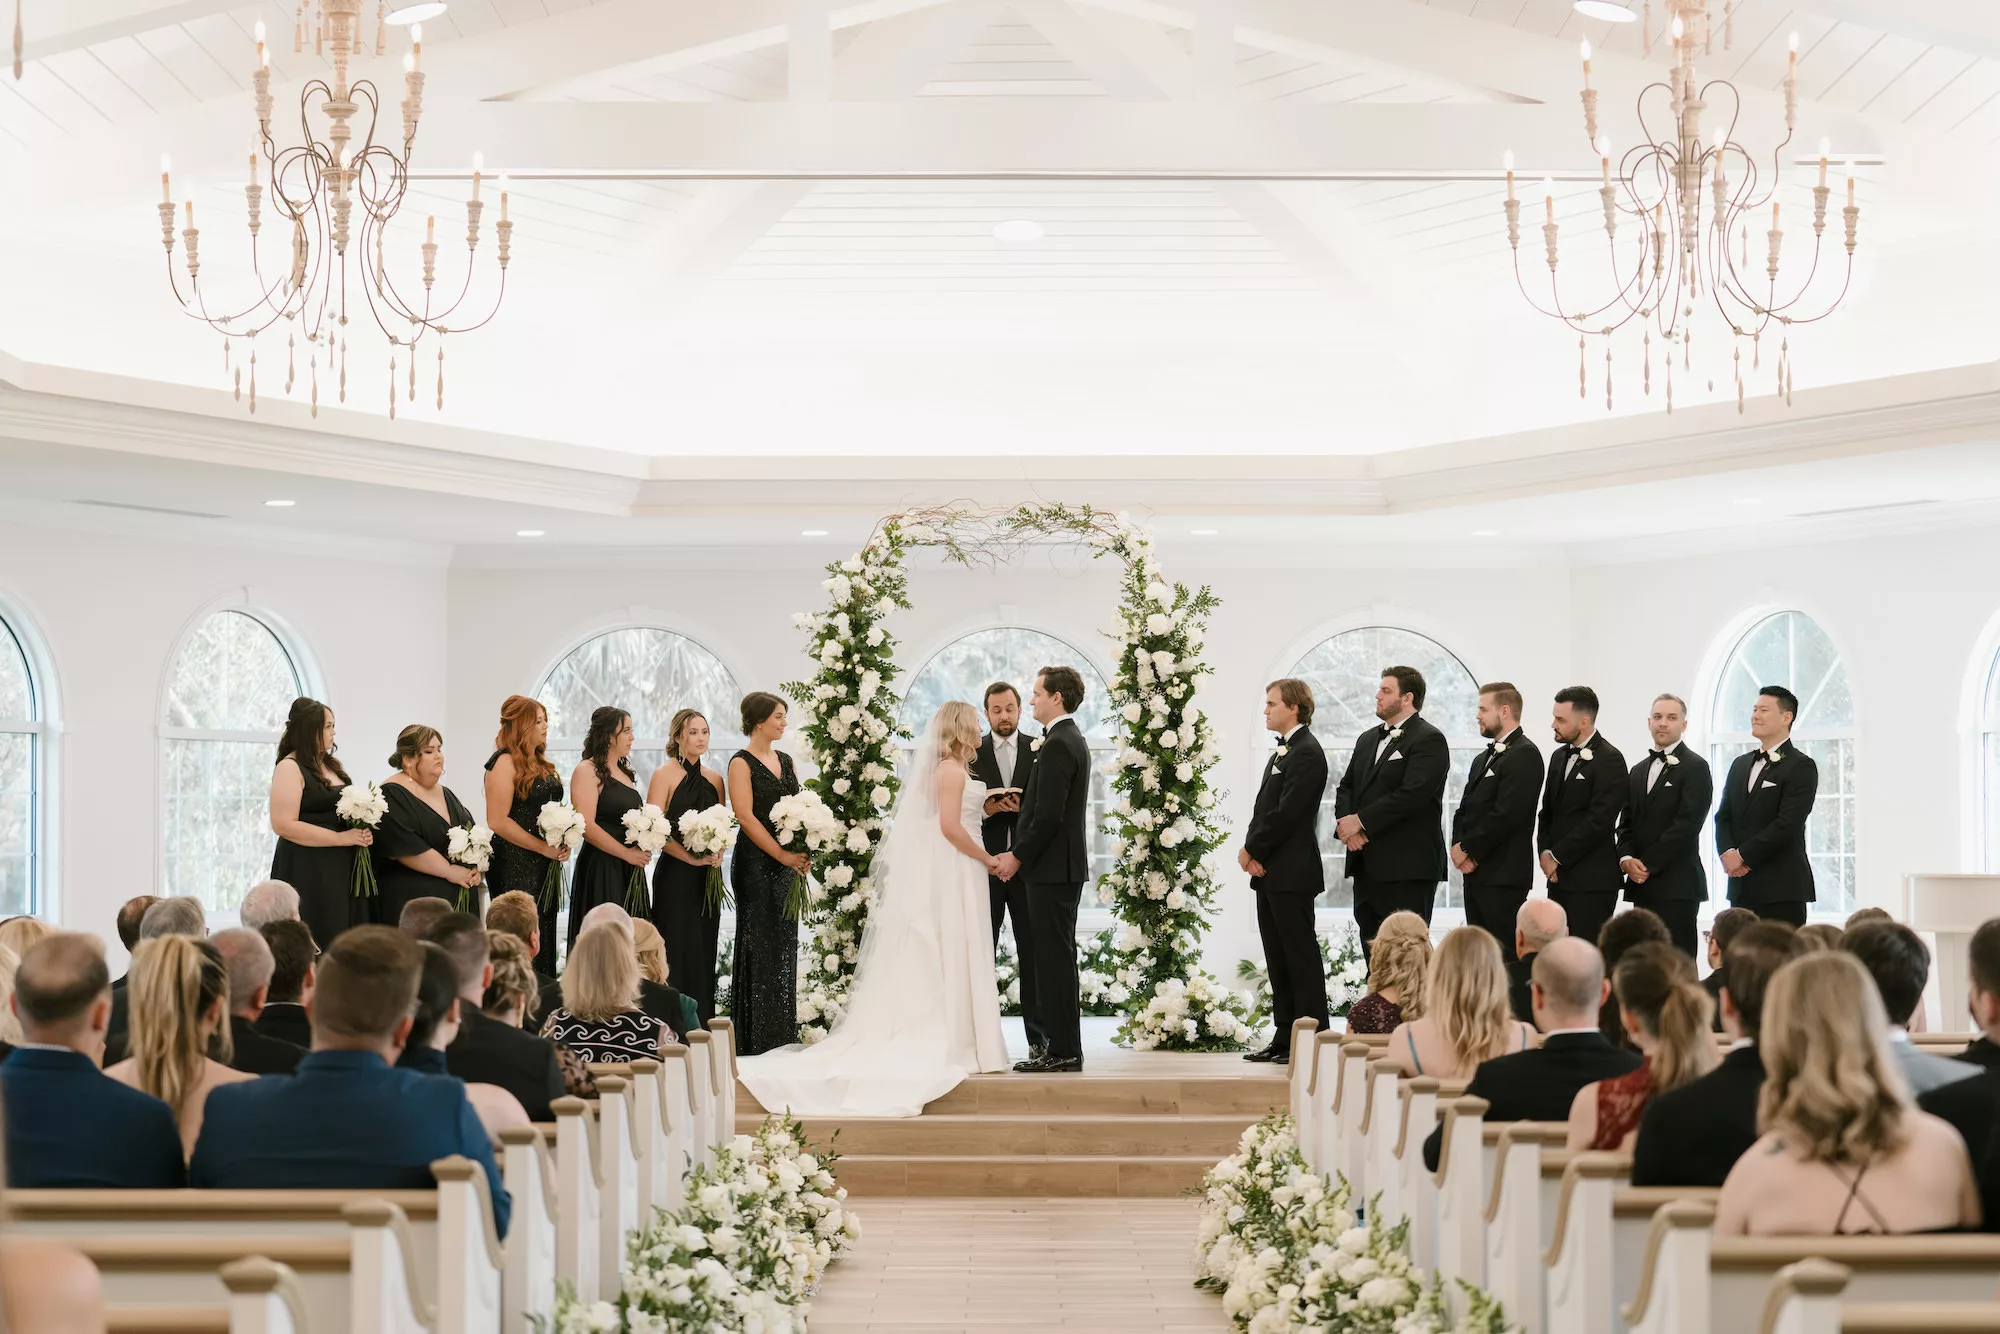 Bride and Groom Just Married Wedding Portrait | Classic Wedding Ceremony Aisle Decor Ideas | White Roses, Baby's Breath, Hydrangeas, and Greenery Flower Arrangements | Safety Harbor Venue Harborside Chapel